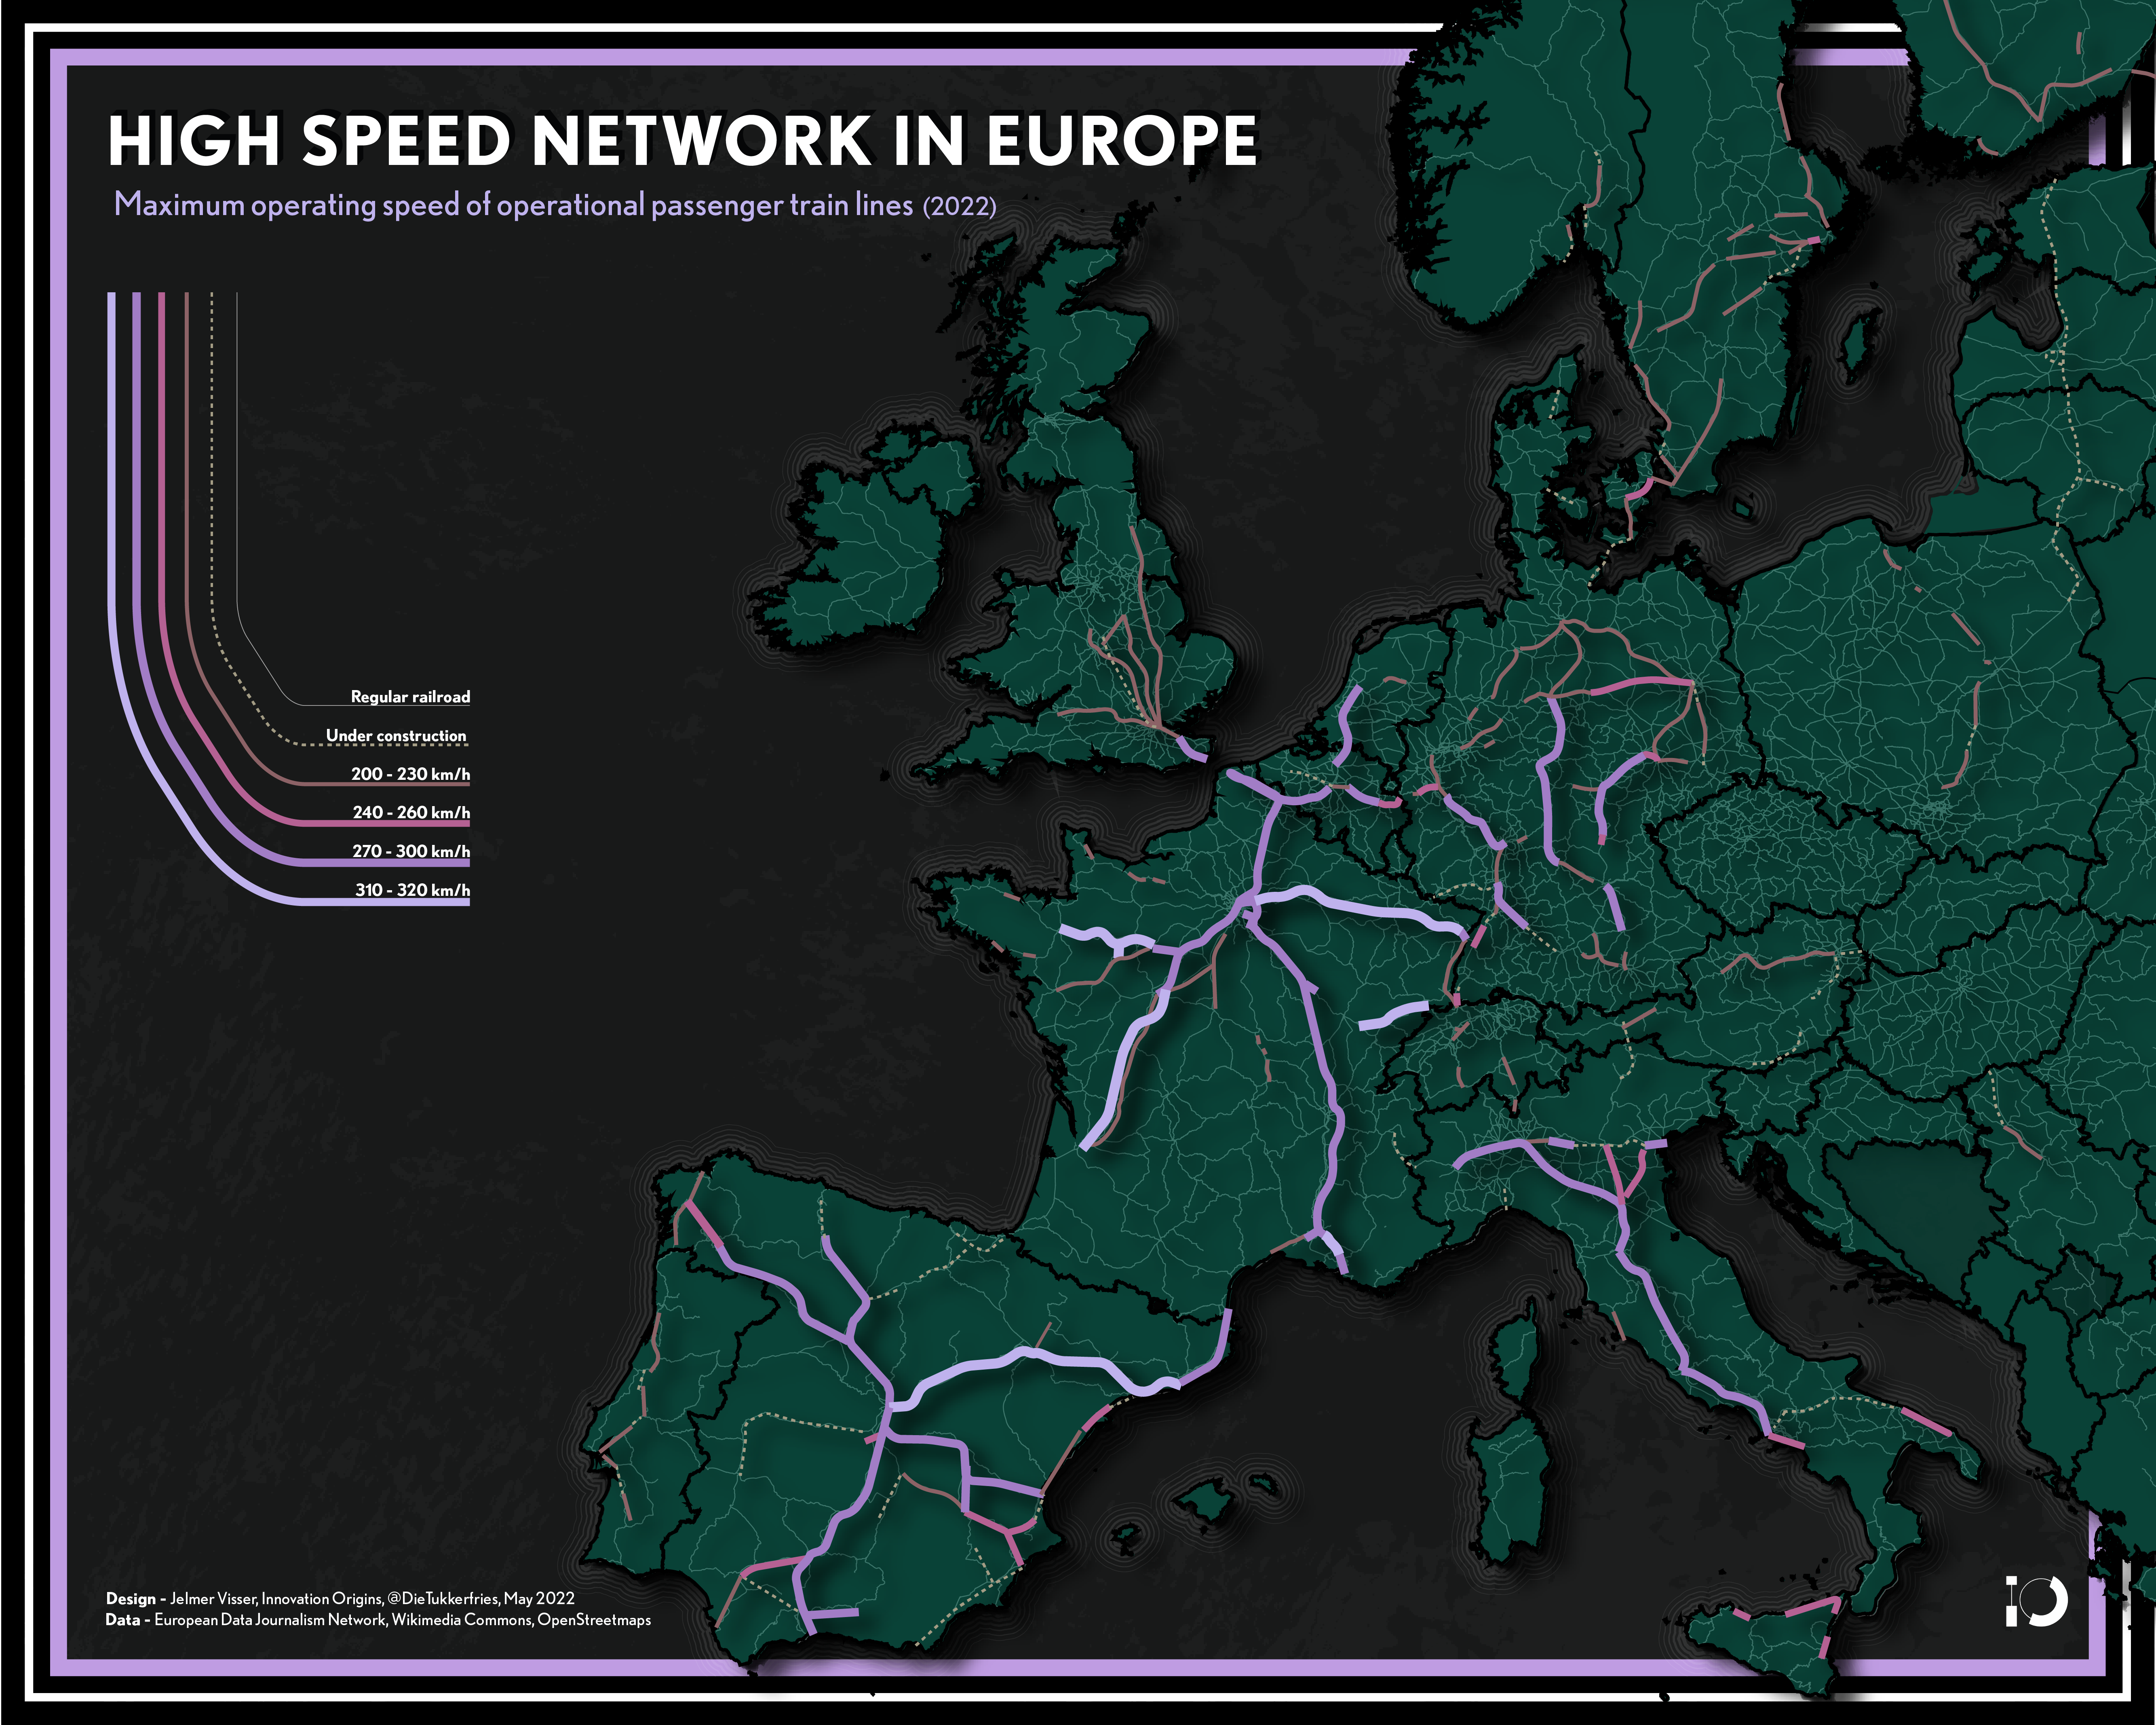 Analysis - Will Europe's high-speed rail network replace continental flights?